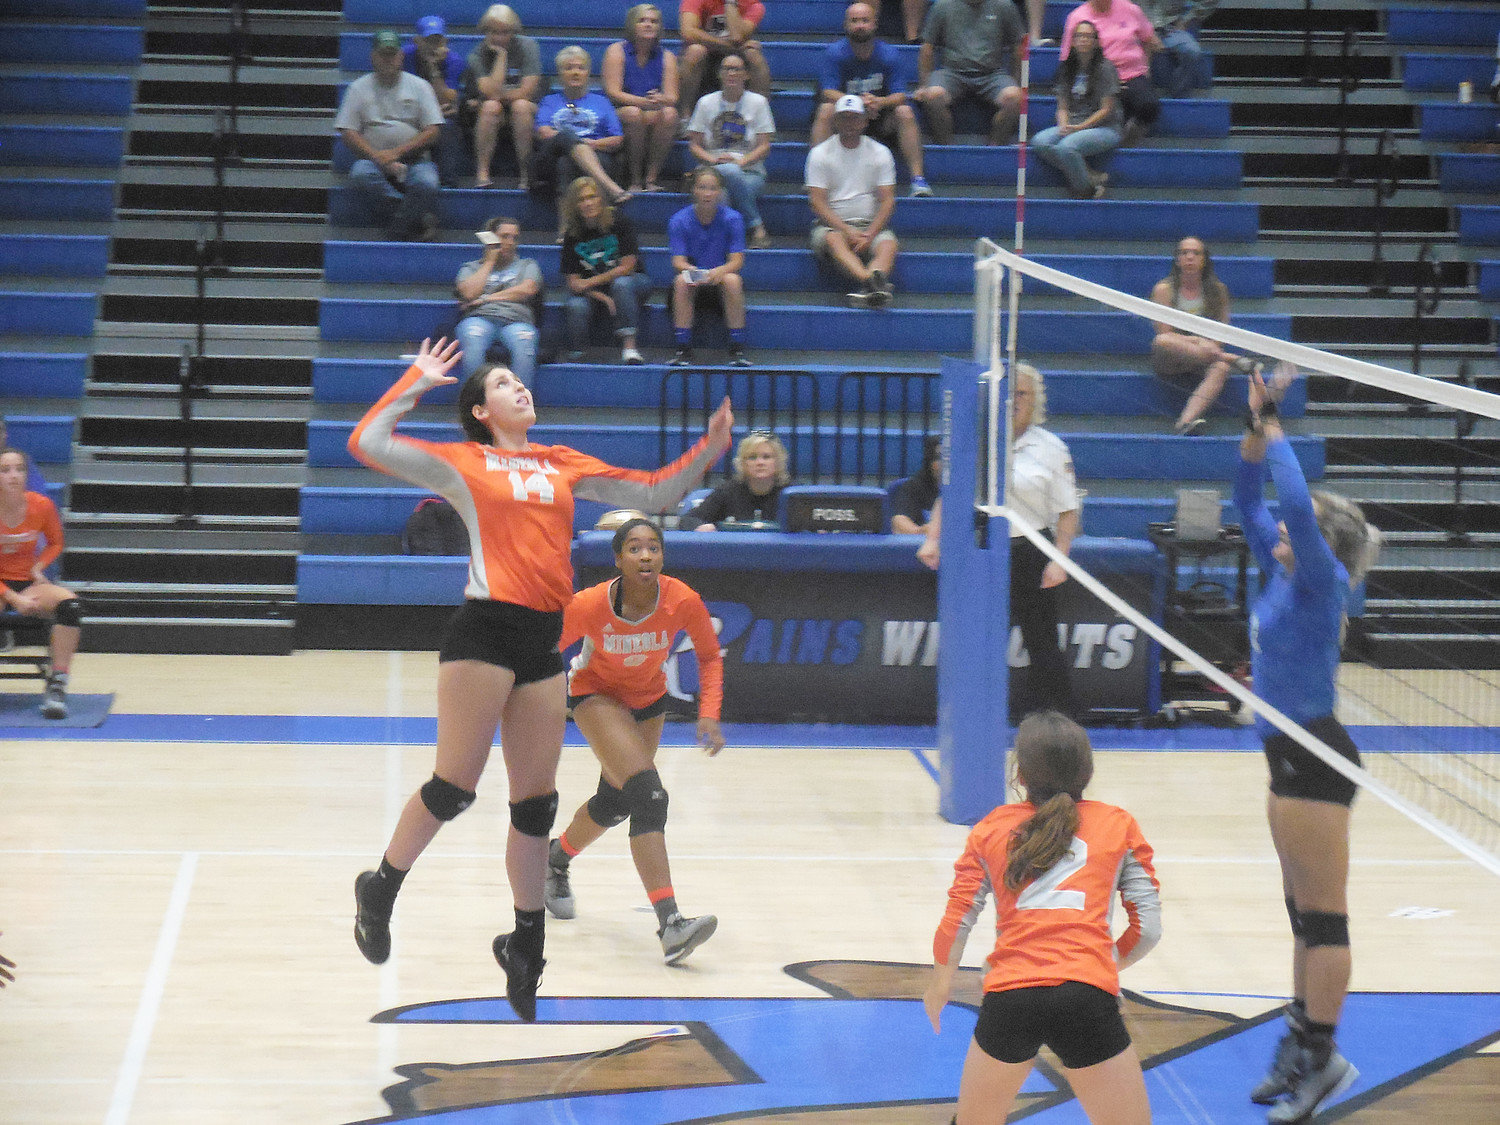 Mineola’s Audrey Dowdle goes up for a kill at Rains in a district game last Friday. (Monitor photos)